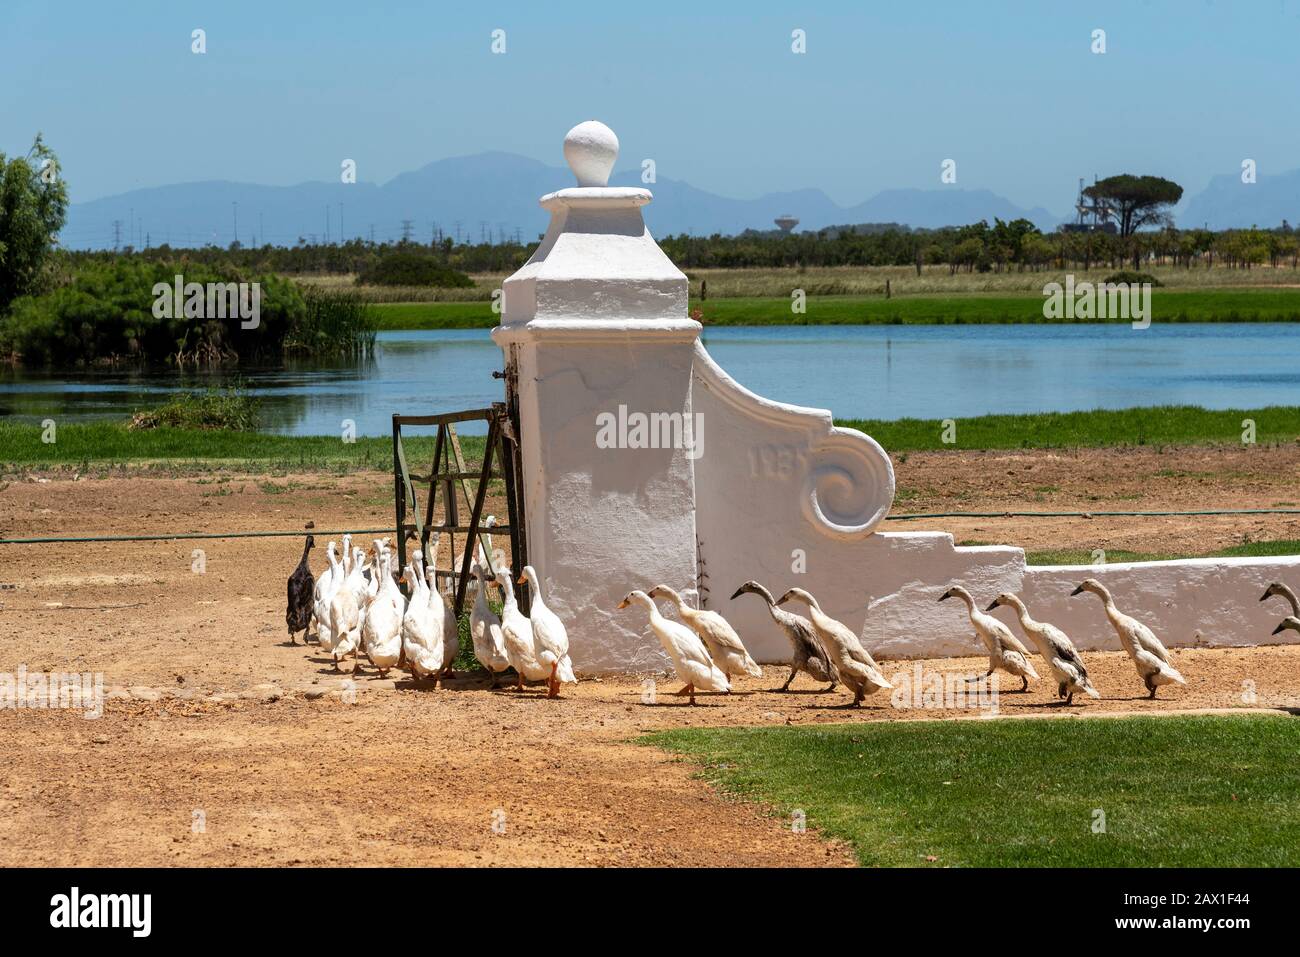 Faure near Stellenbosch, Western Cape, South Africa. flock of Indian Runner ducks waddle past the homestead at Vergenoegt wine estate Stock Photo